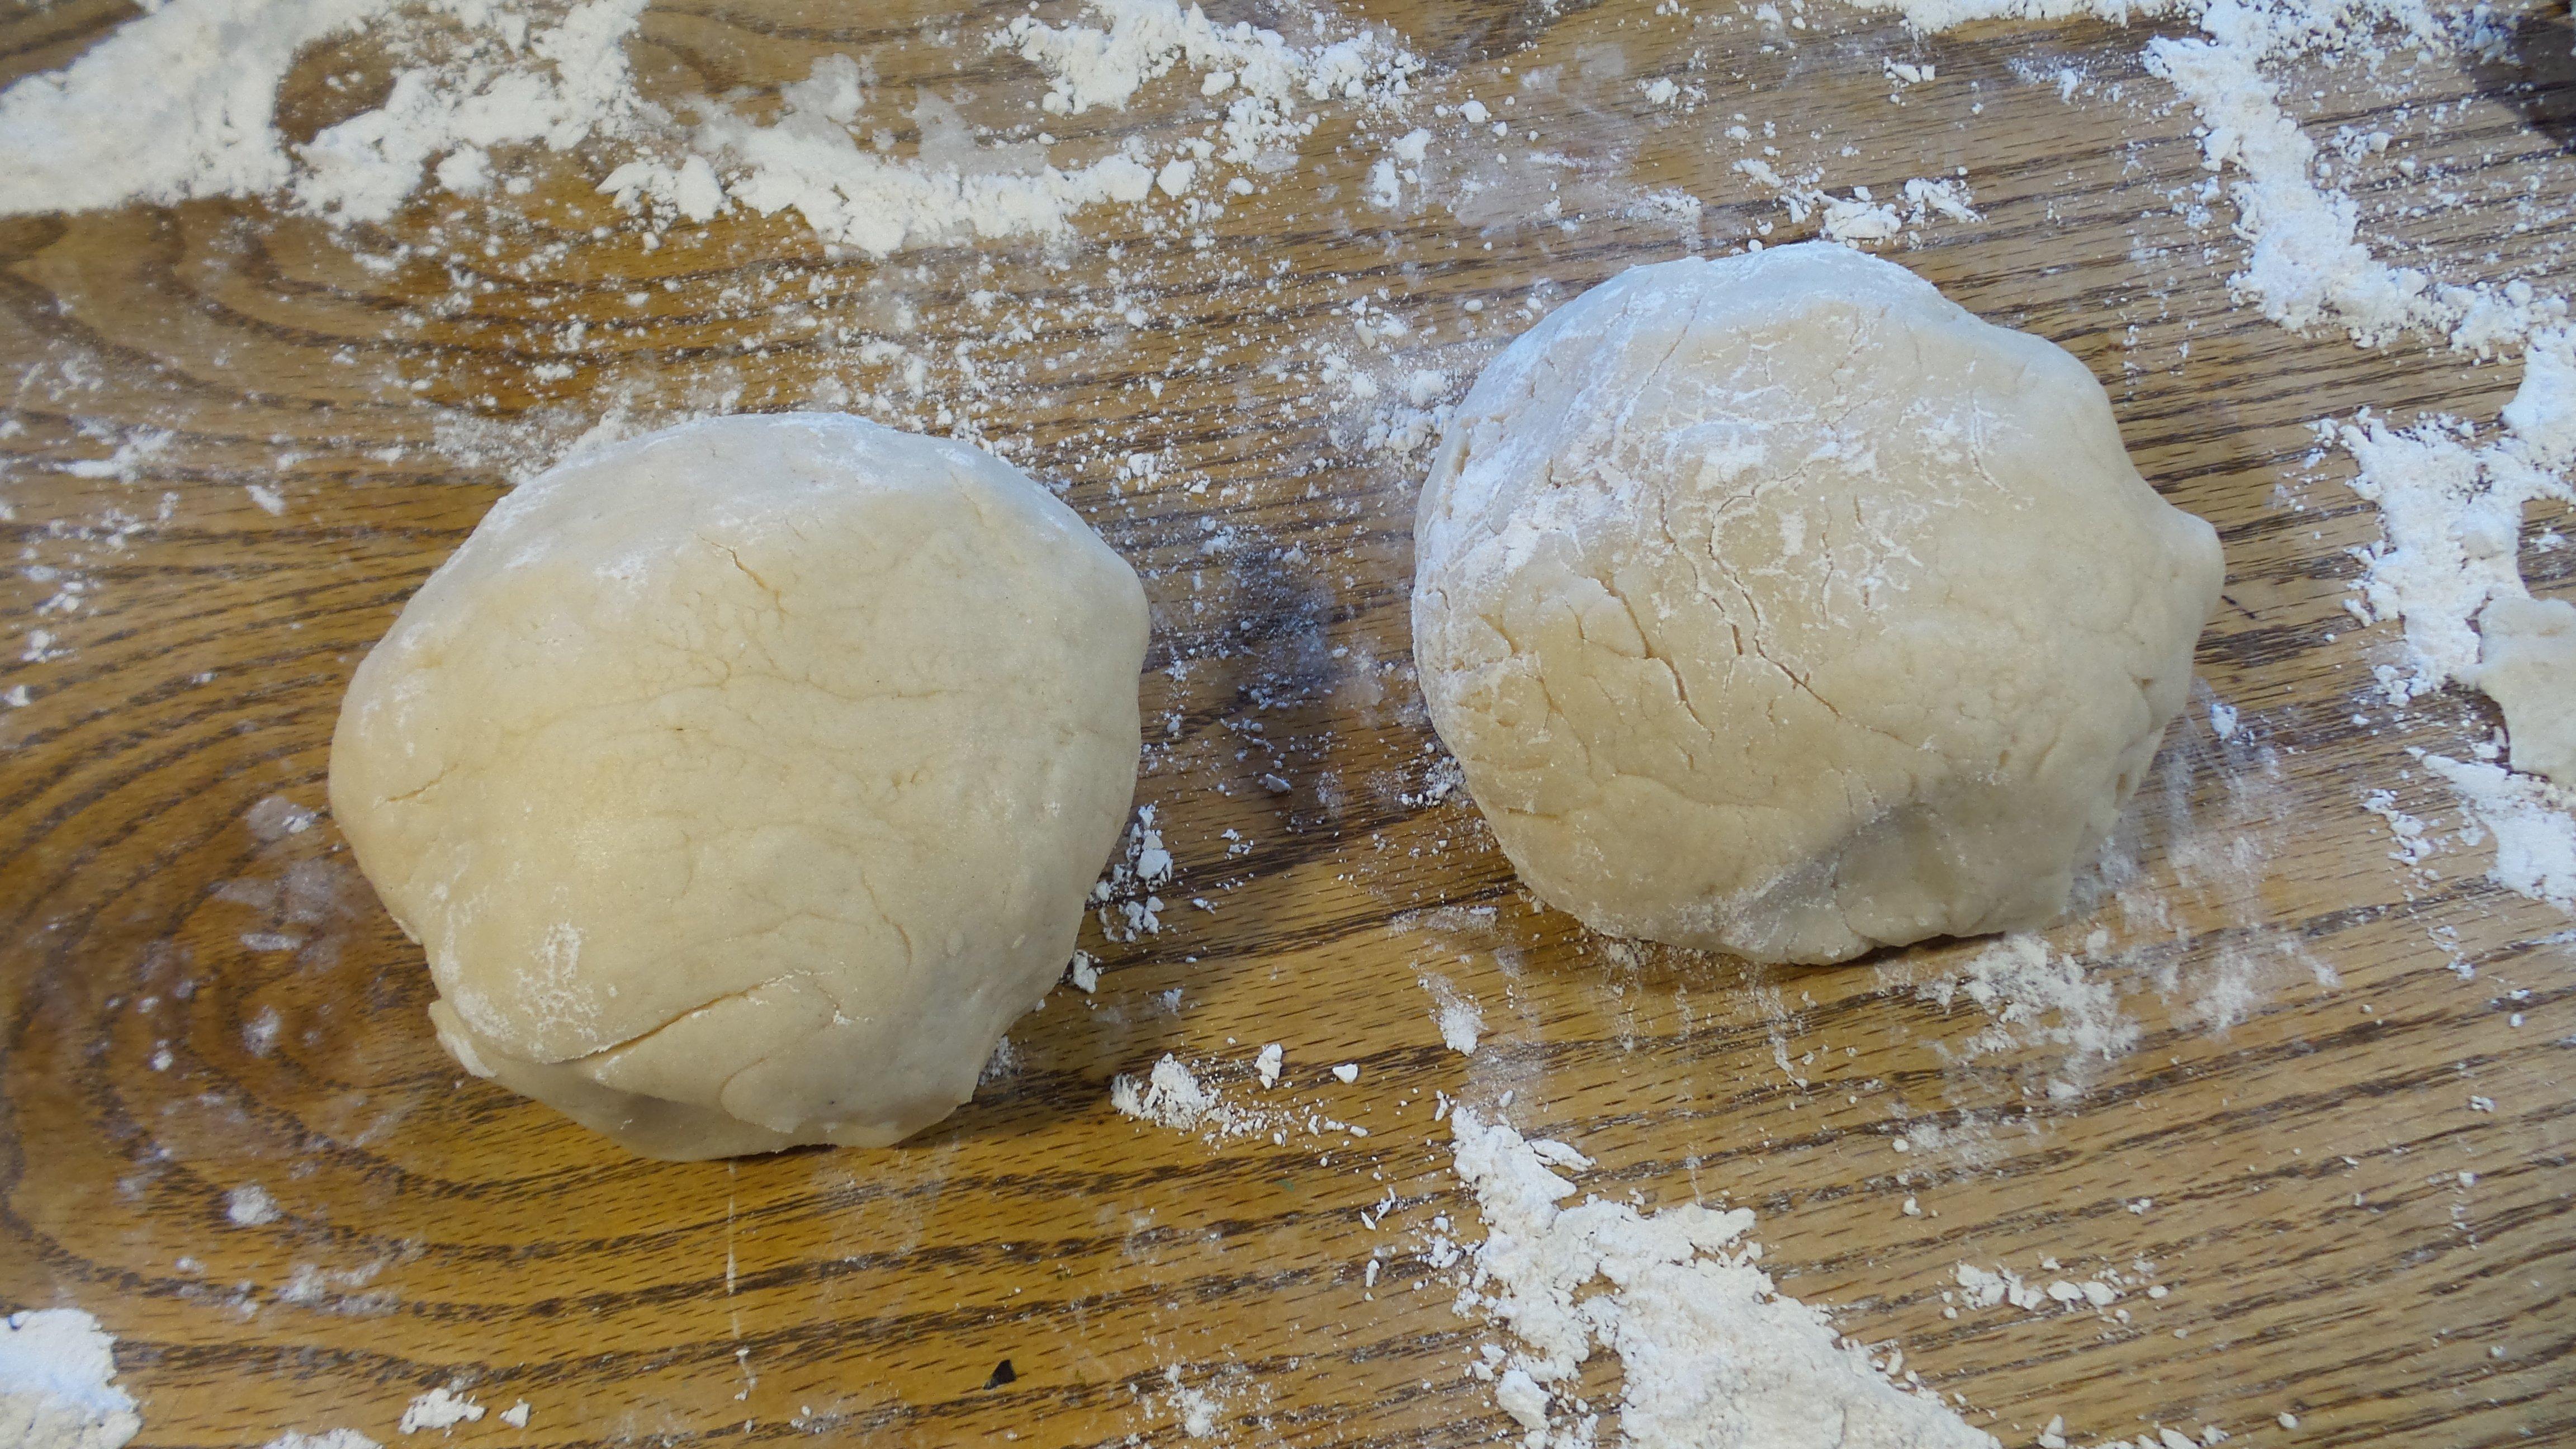 Divide the dough into two equal balls and set aside to rest.